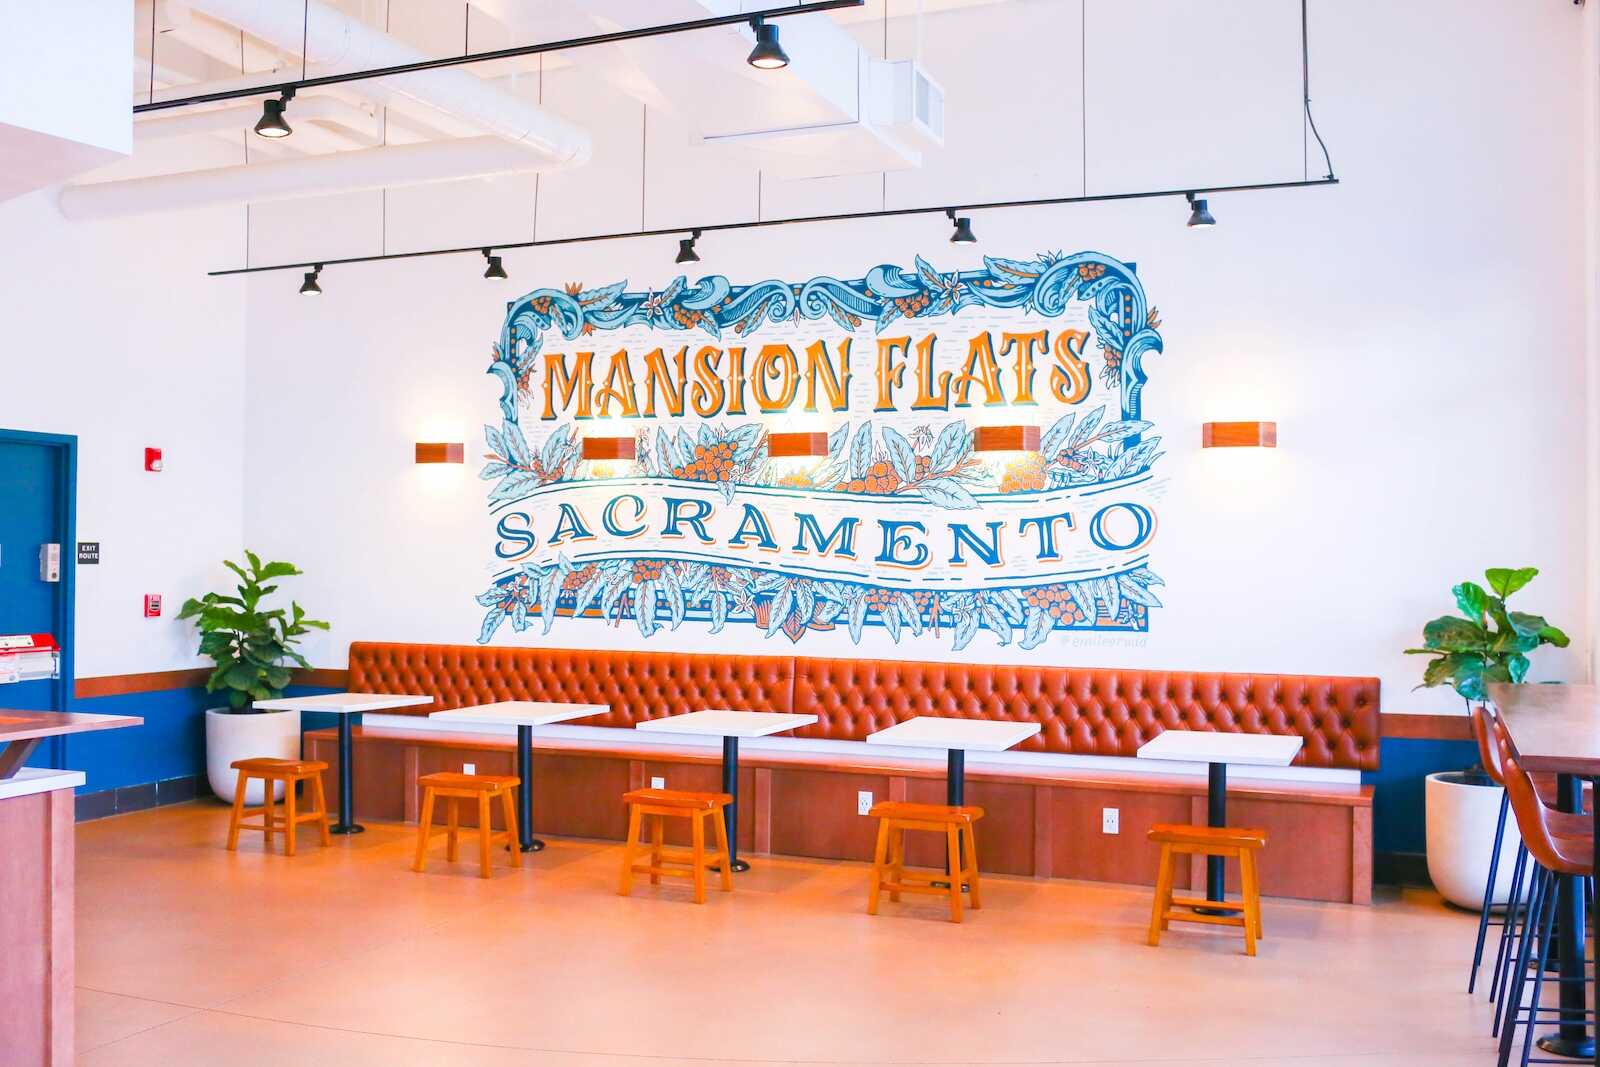 A large wall mural inside Goodside Coffee reads Mansion Flats Sacramento